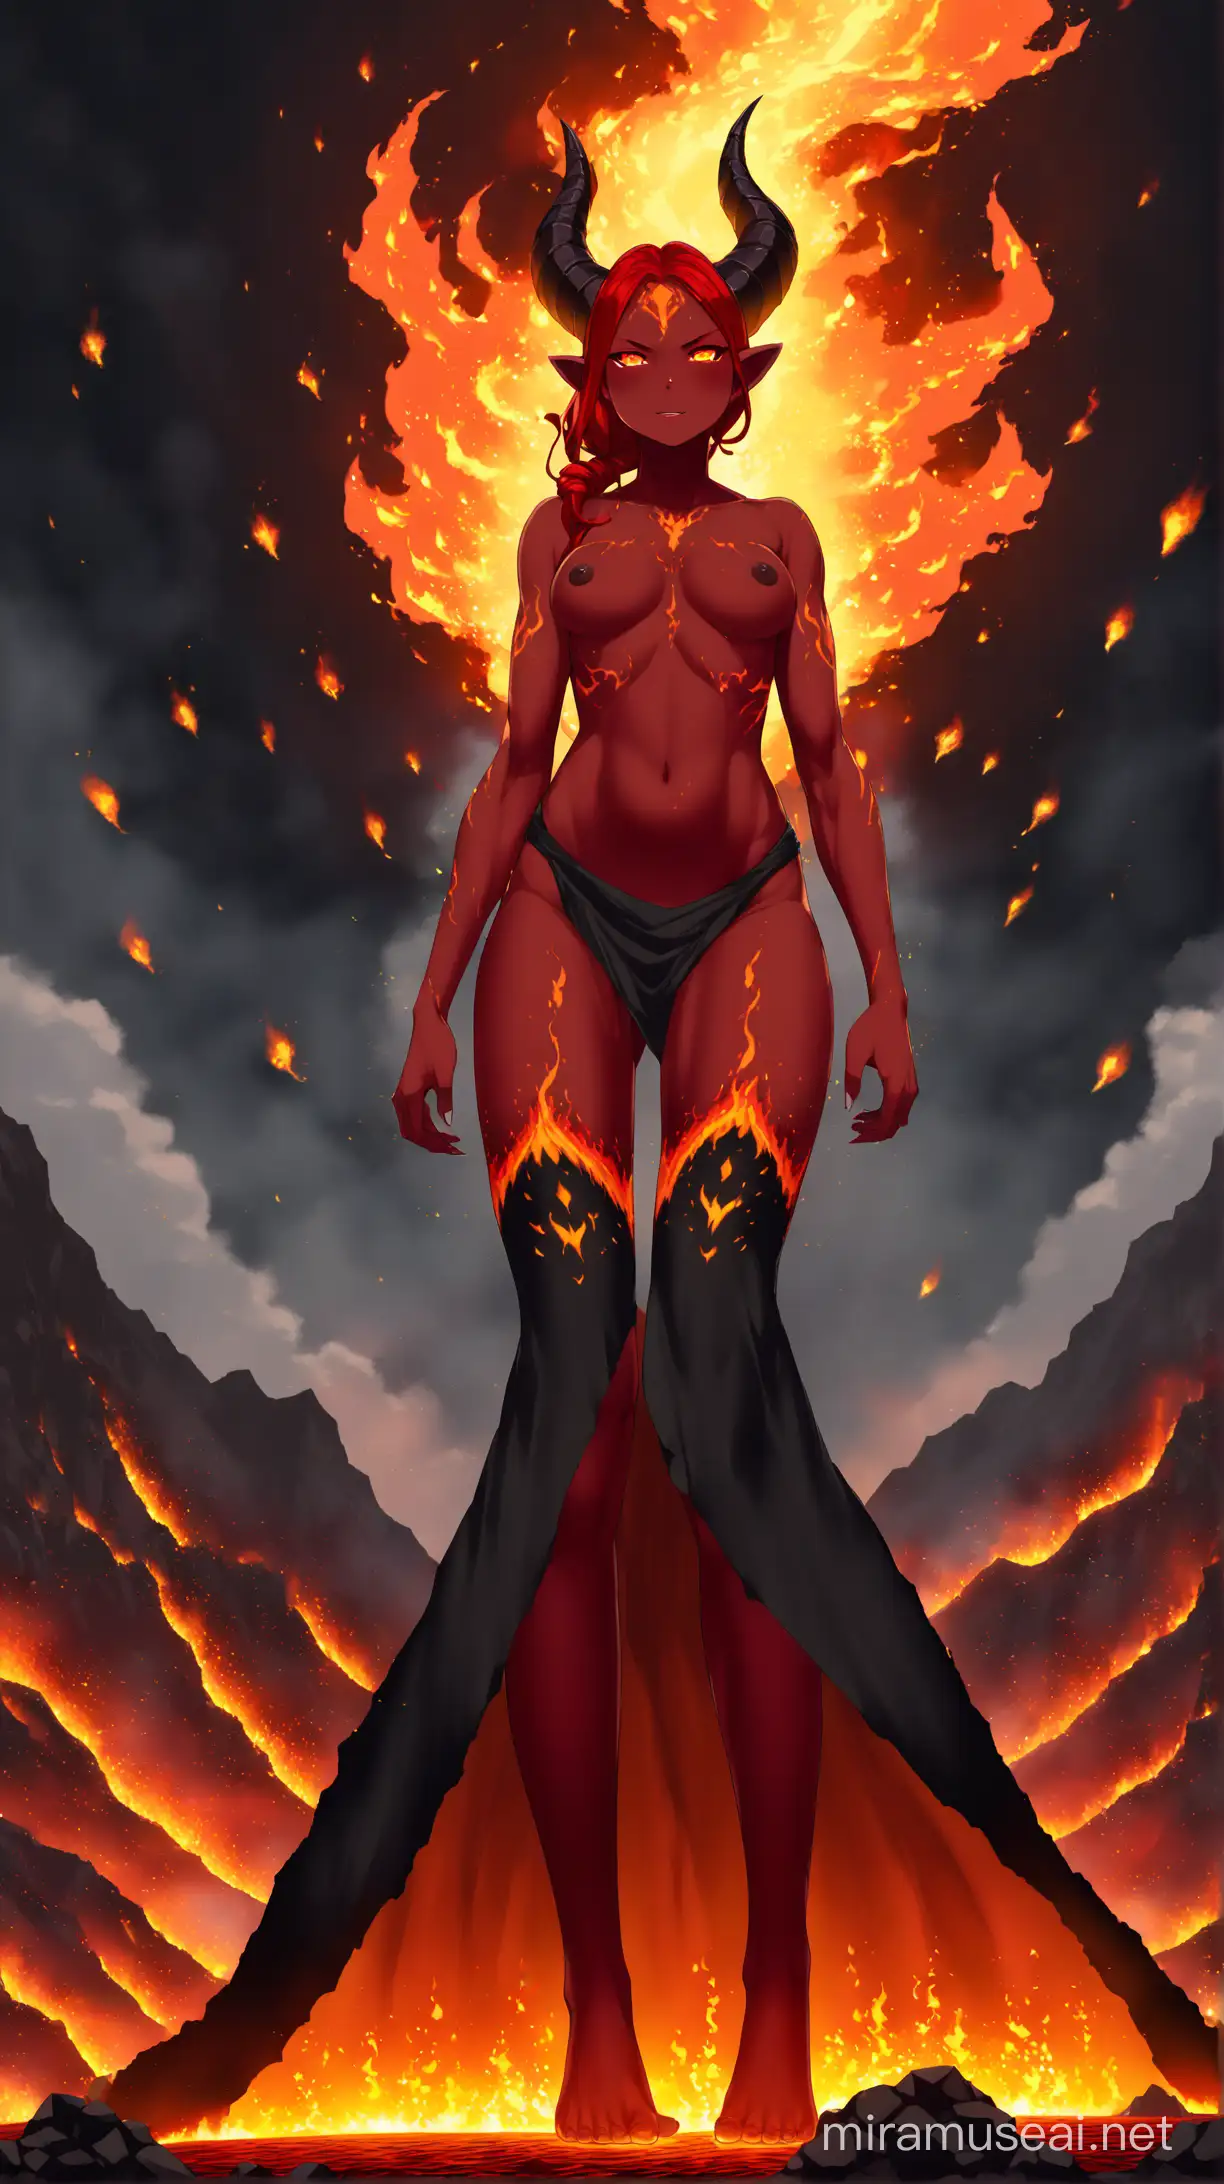 Fiery Ifrit Woman in Volcanic Setting with Glowing Eyes